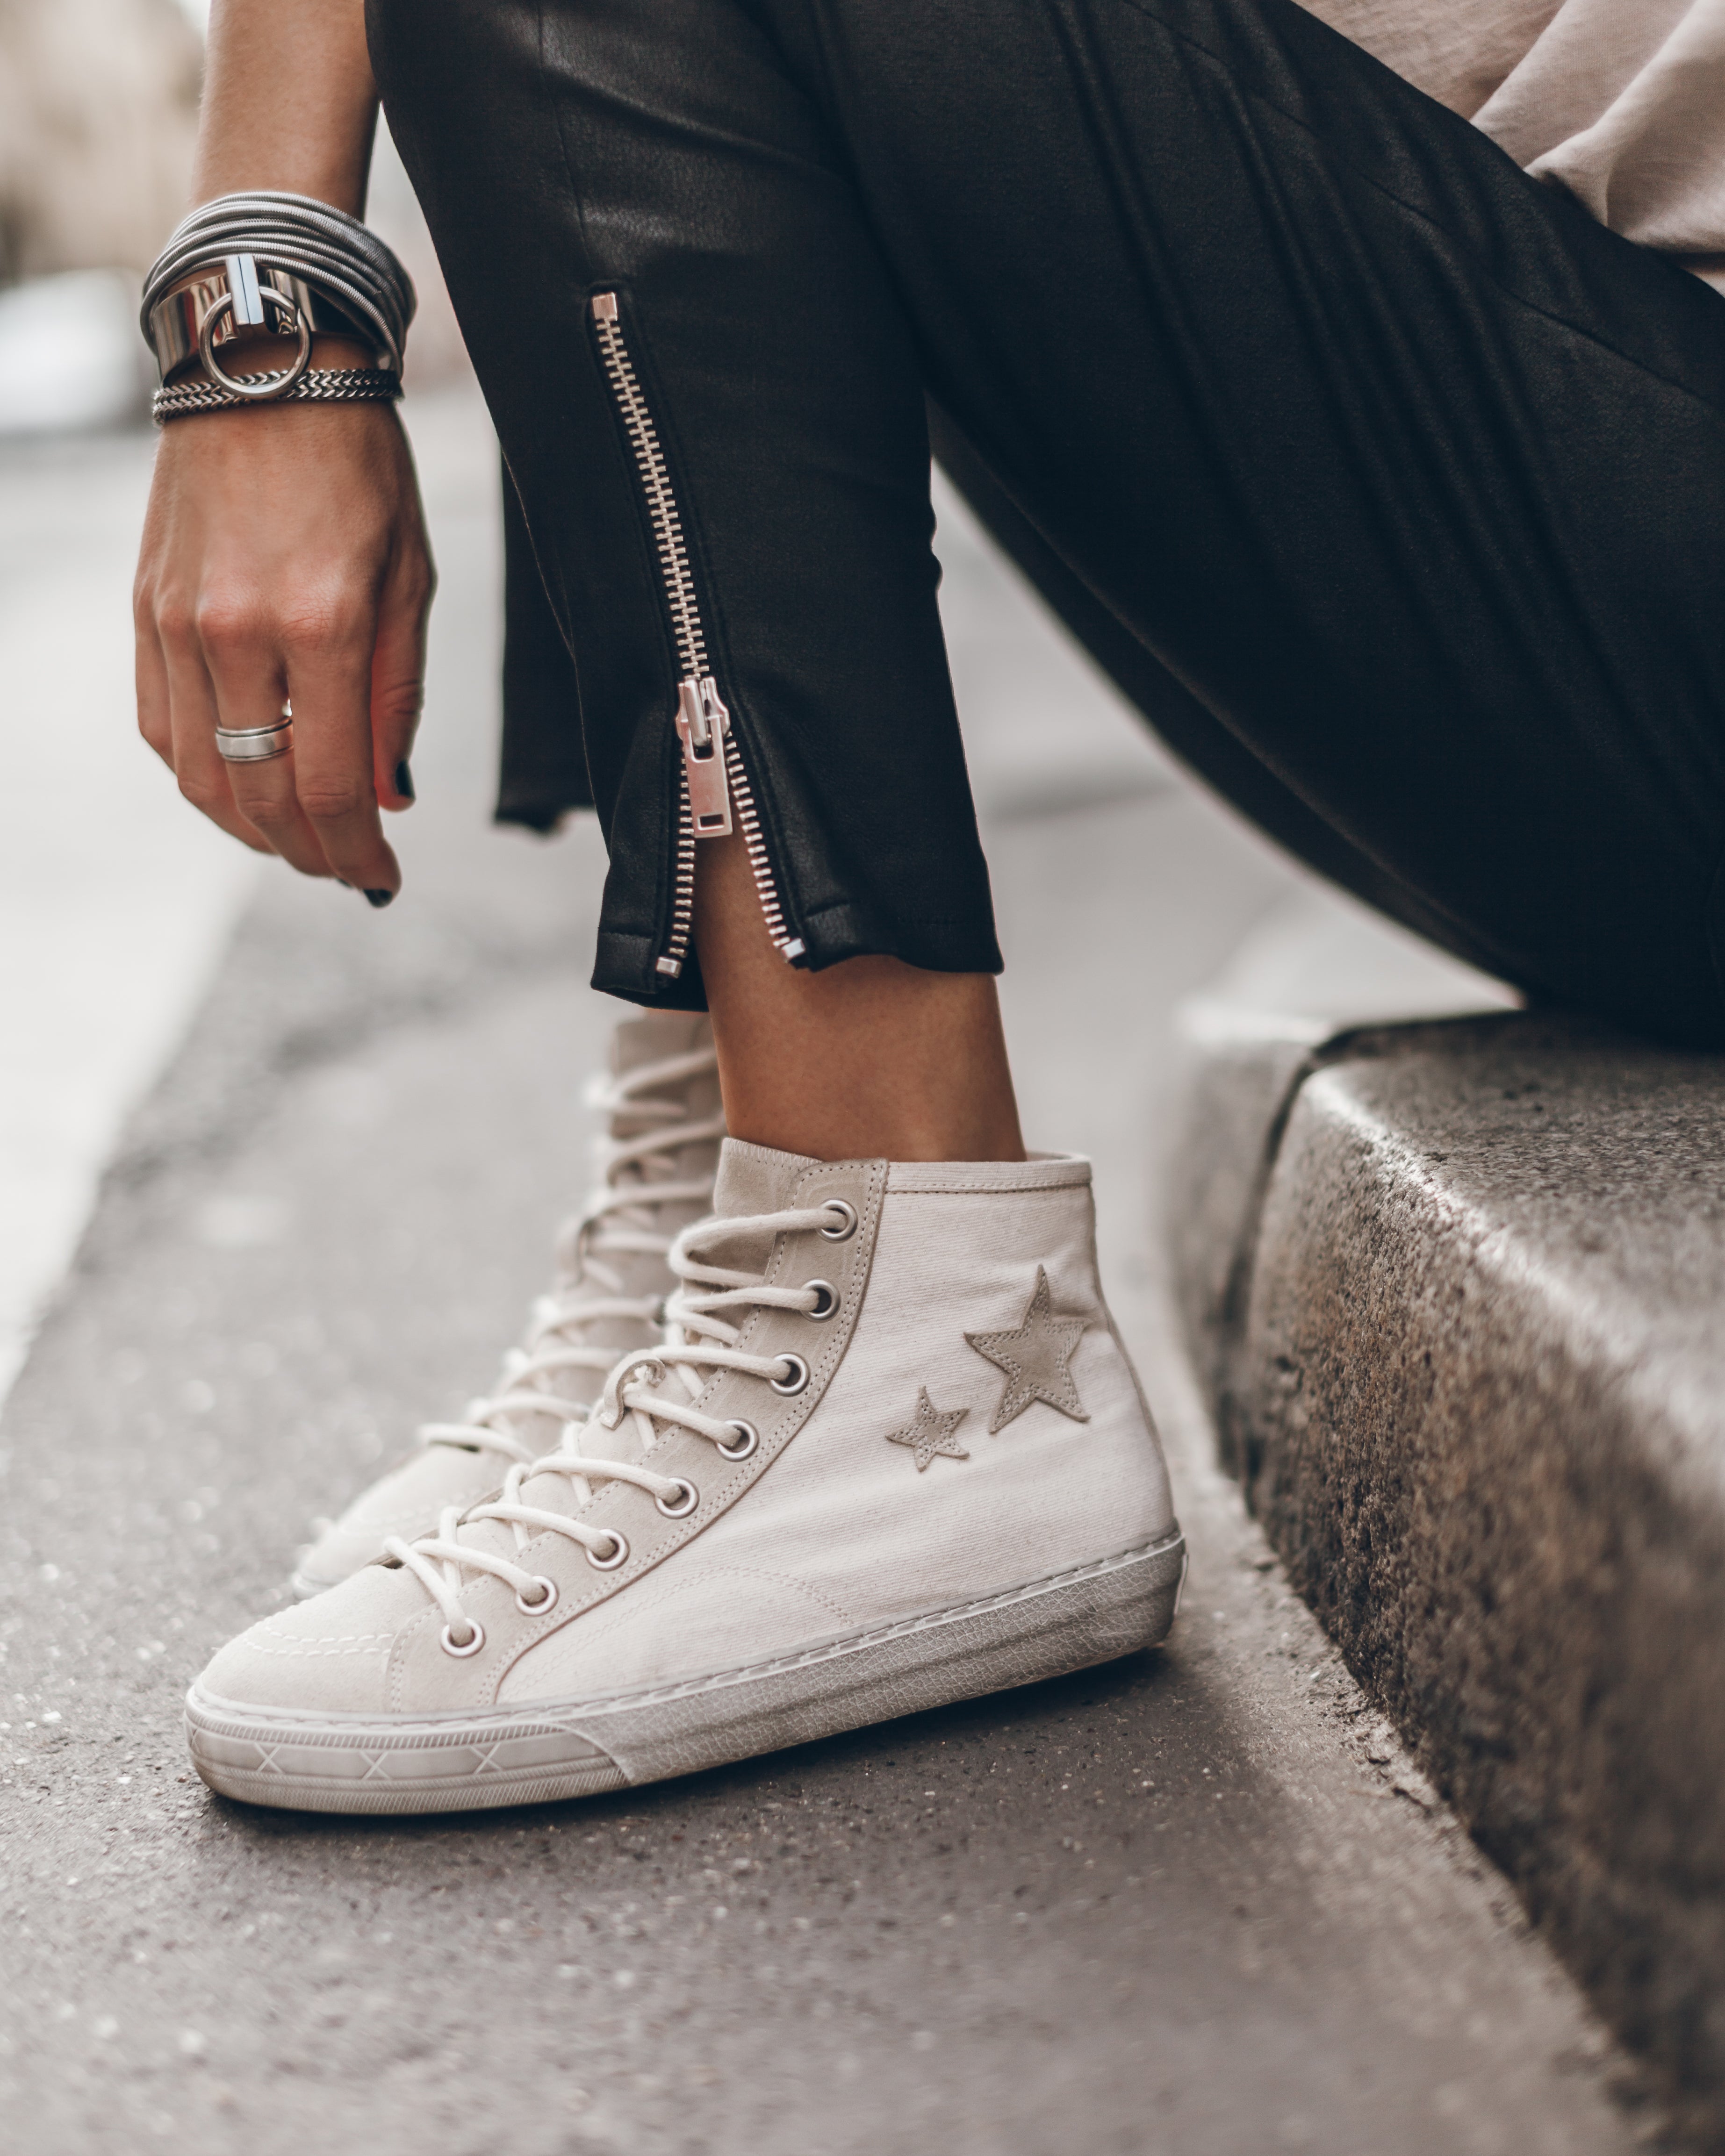 The Light Canvas Sneakers